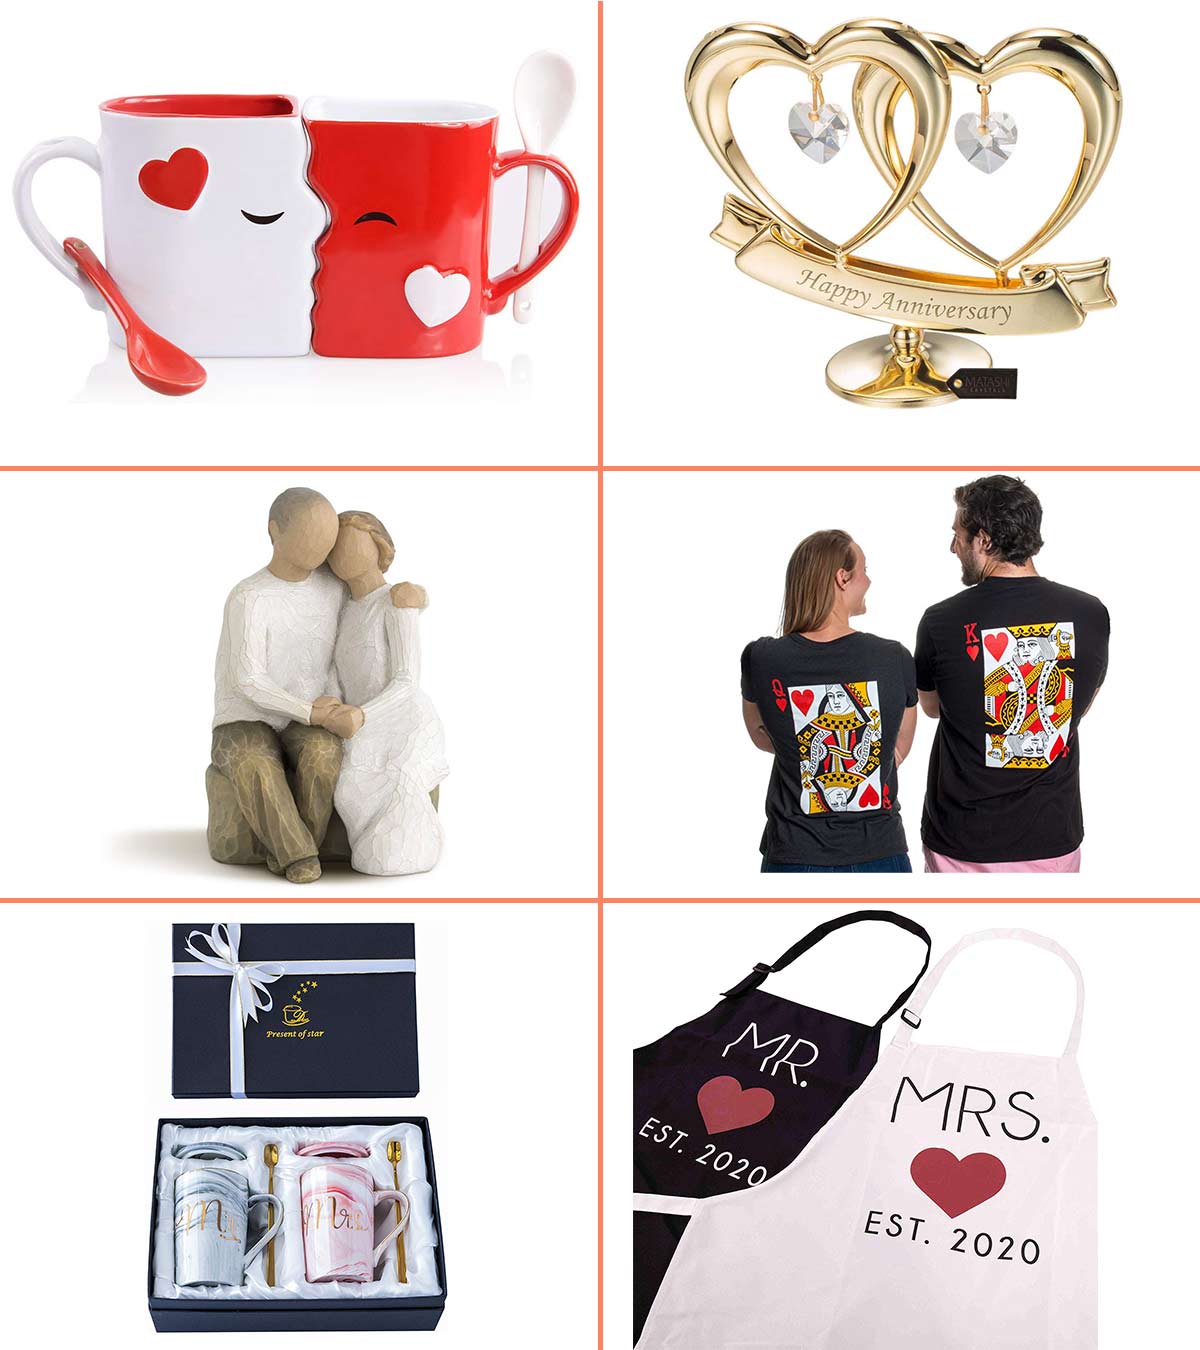 27 Best Wedding Anniversary Gift Ideas That Can't Go Wrong In 2023